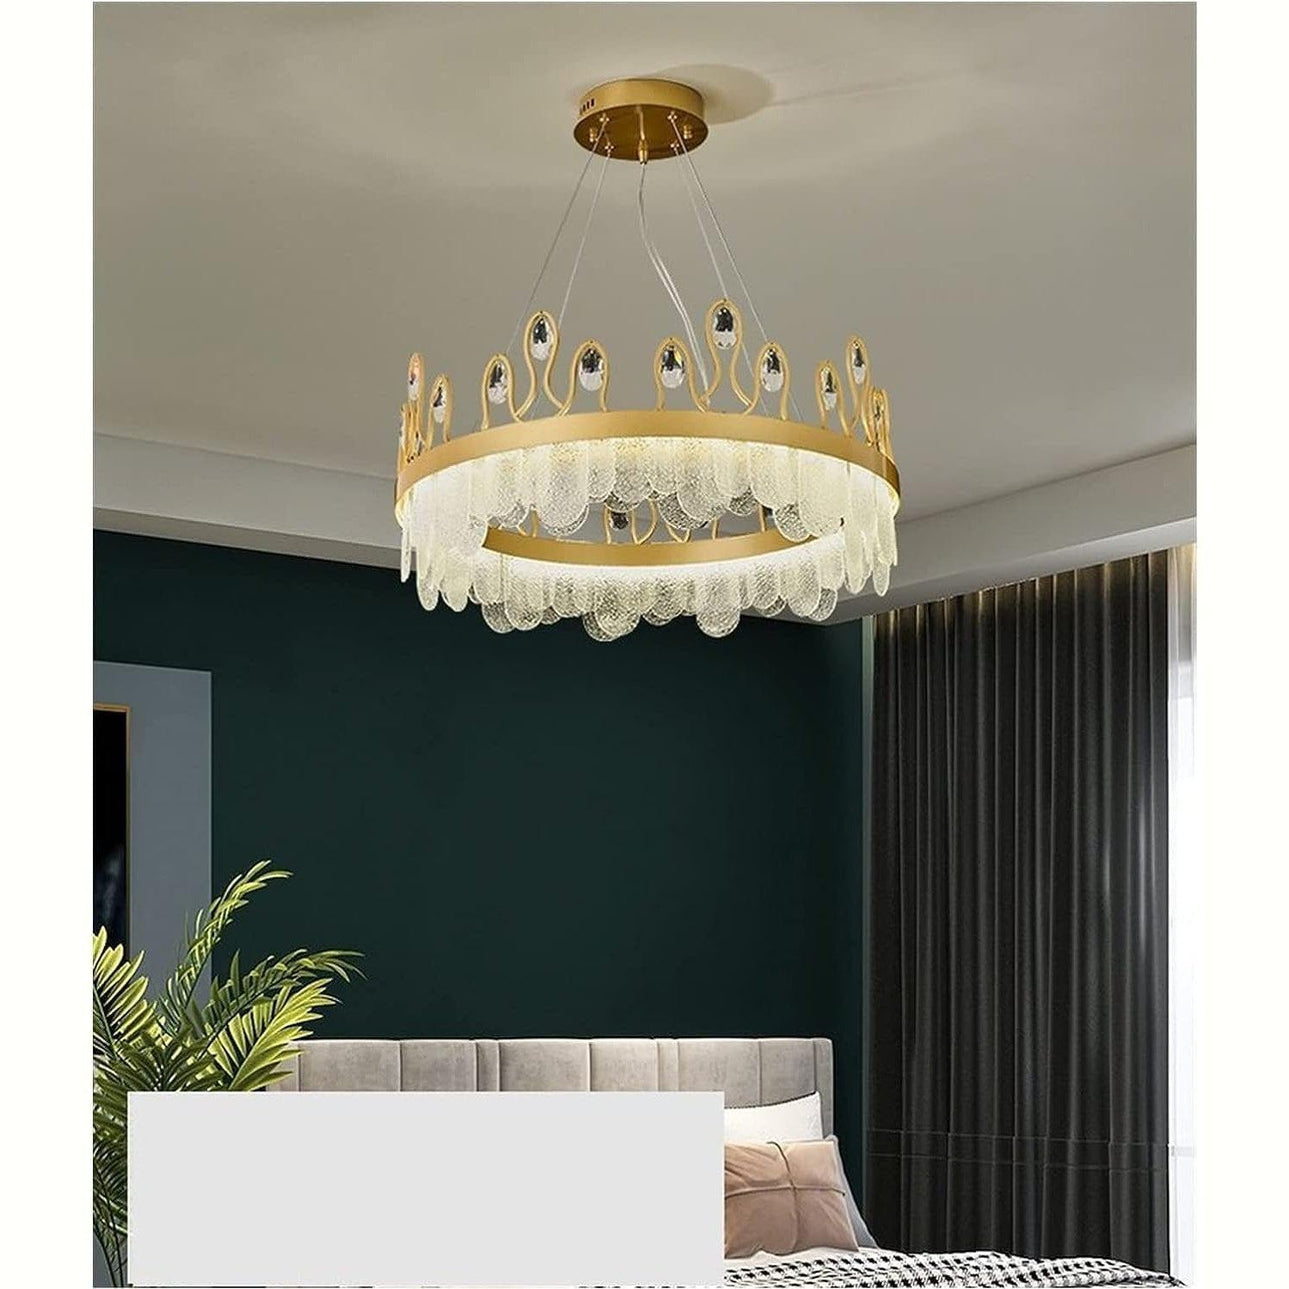 Buy Luxury Modern LED Crystal Crown Glass Pendant Chandelier 60cm - CL-11 | Shop at Supply Master Accra, Ghana Lamps & Lightings Buy Tools hardware Building materials